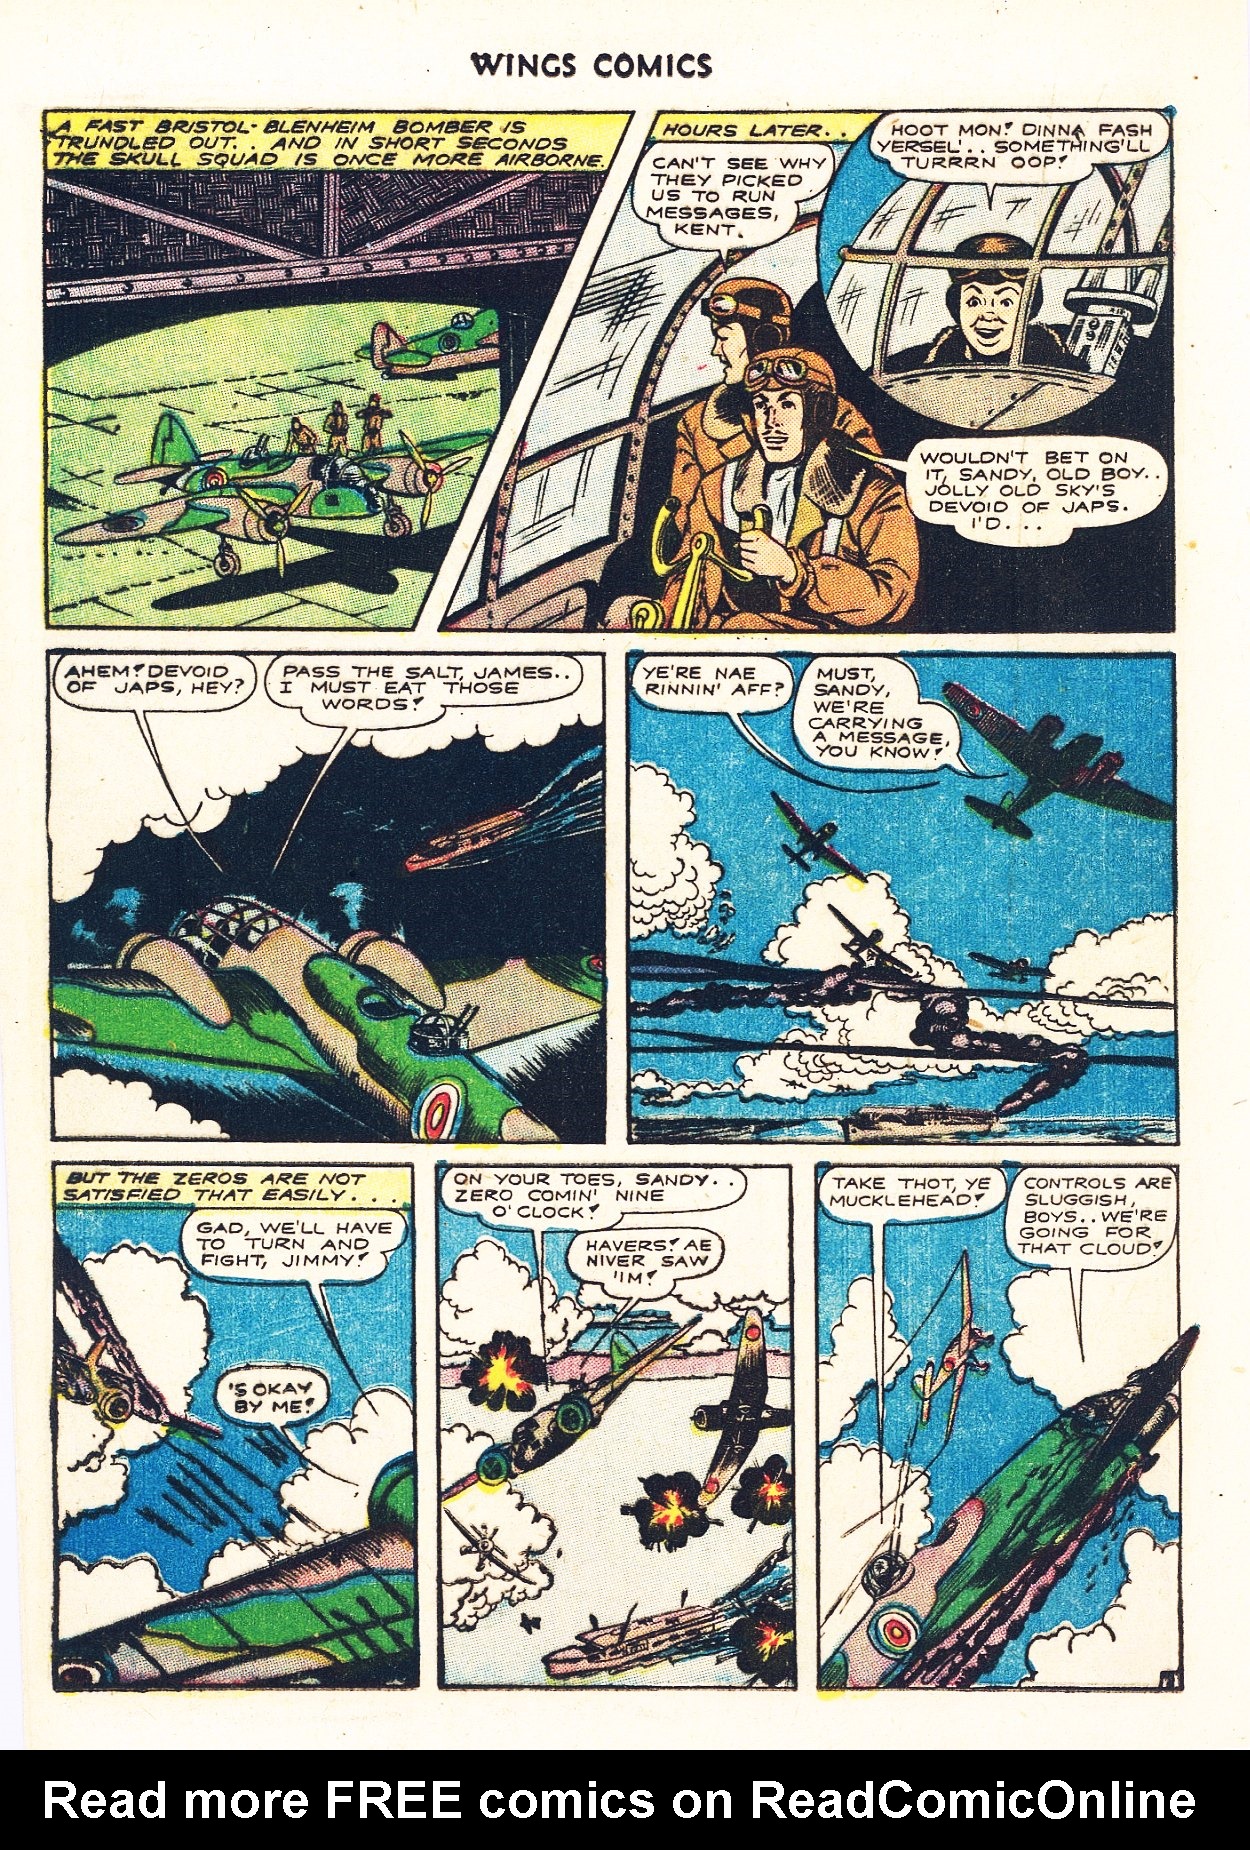 Read online Wings Comics comic -  Issue #41 - 36